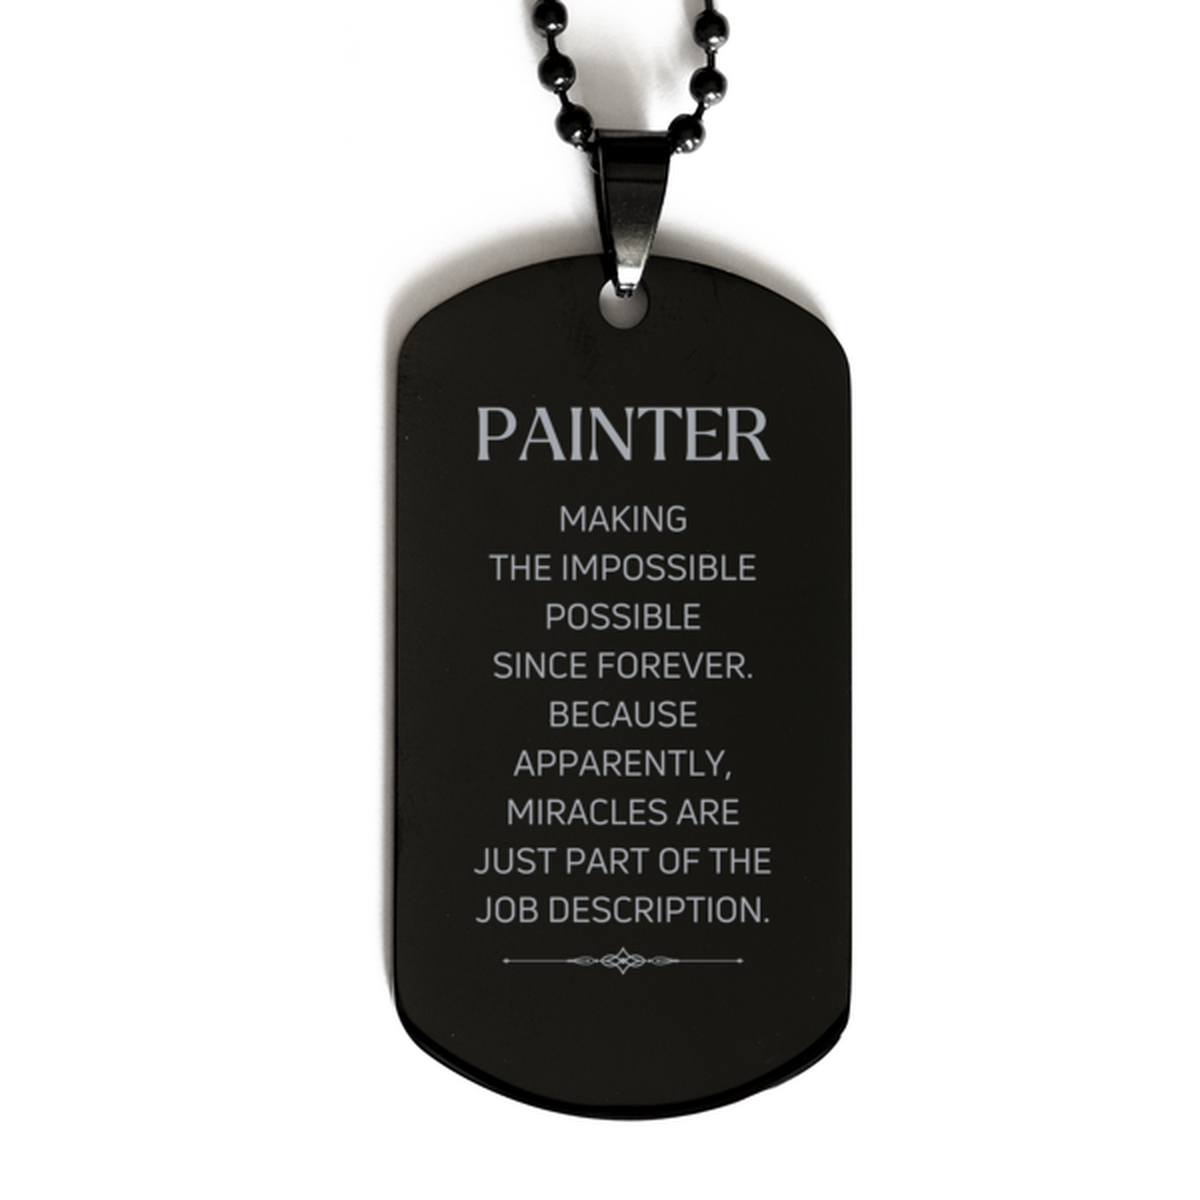 Funny Painter Gifts, Miracles are just part of the job description, Inspirational Birthday Black Dog Tag For Painter, Men, Women, Coworkers, Friends, Boss